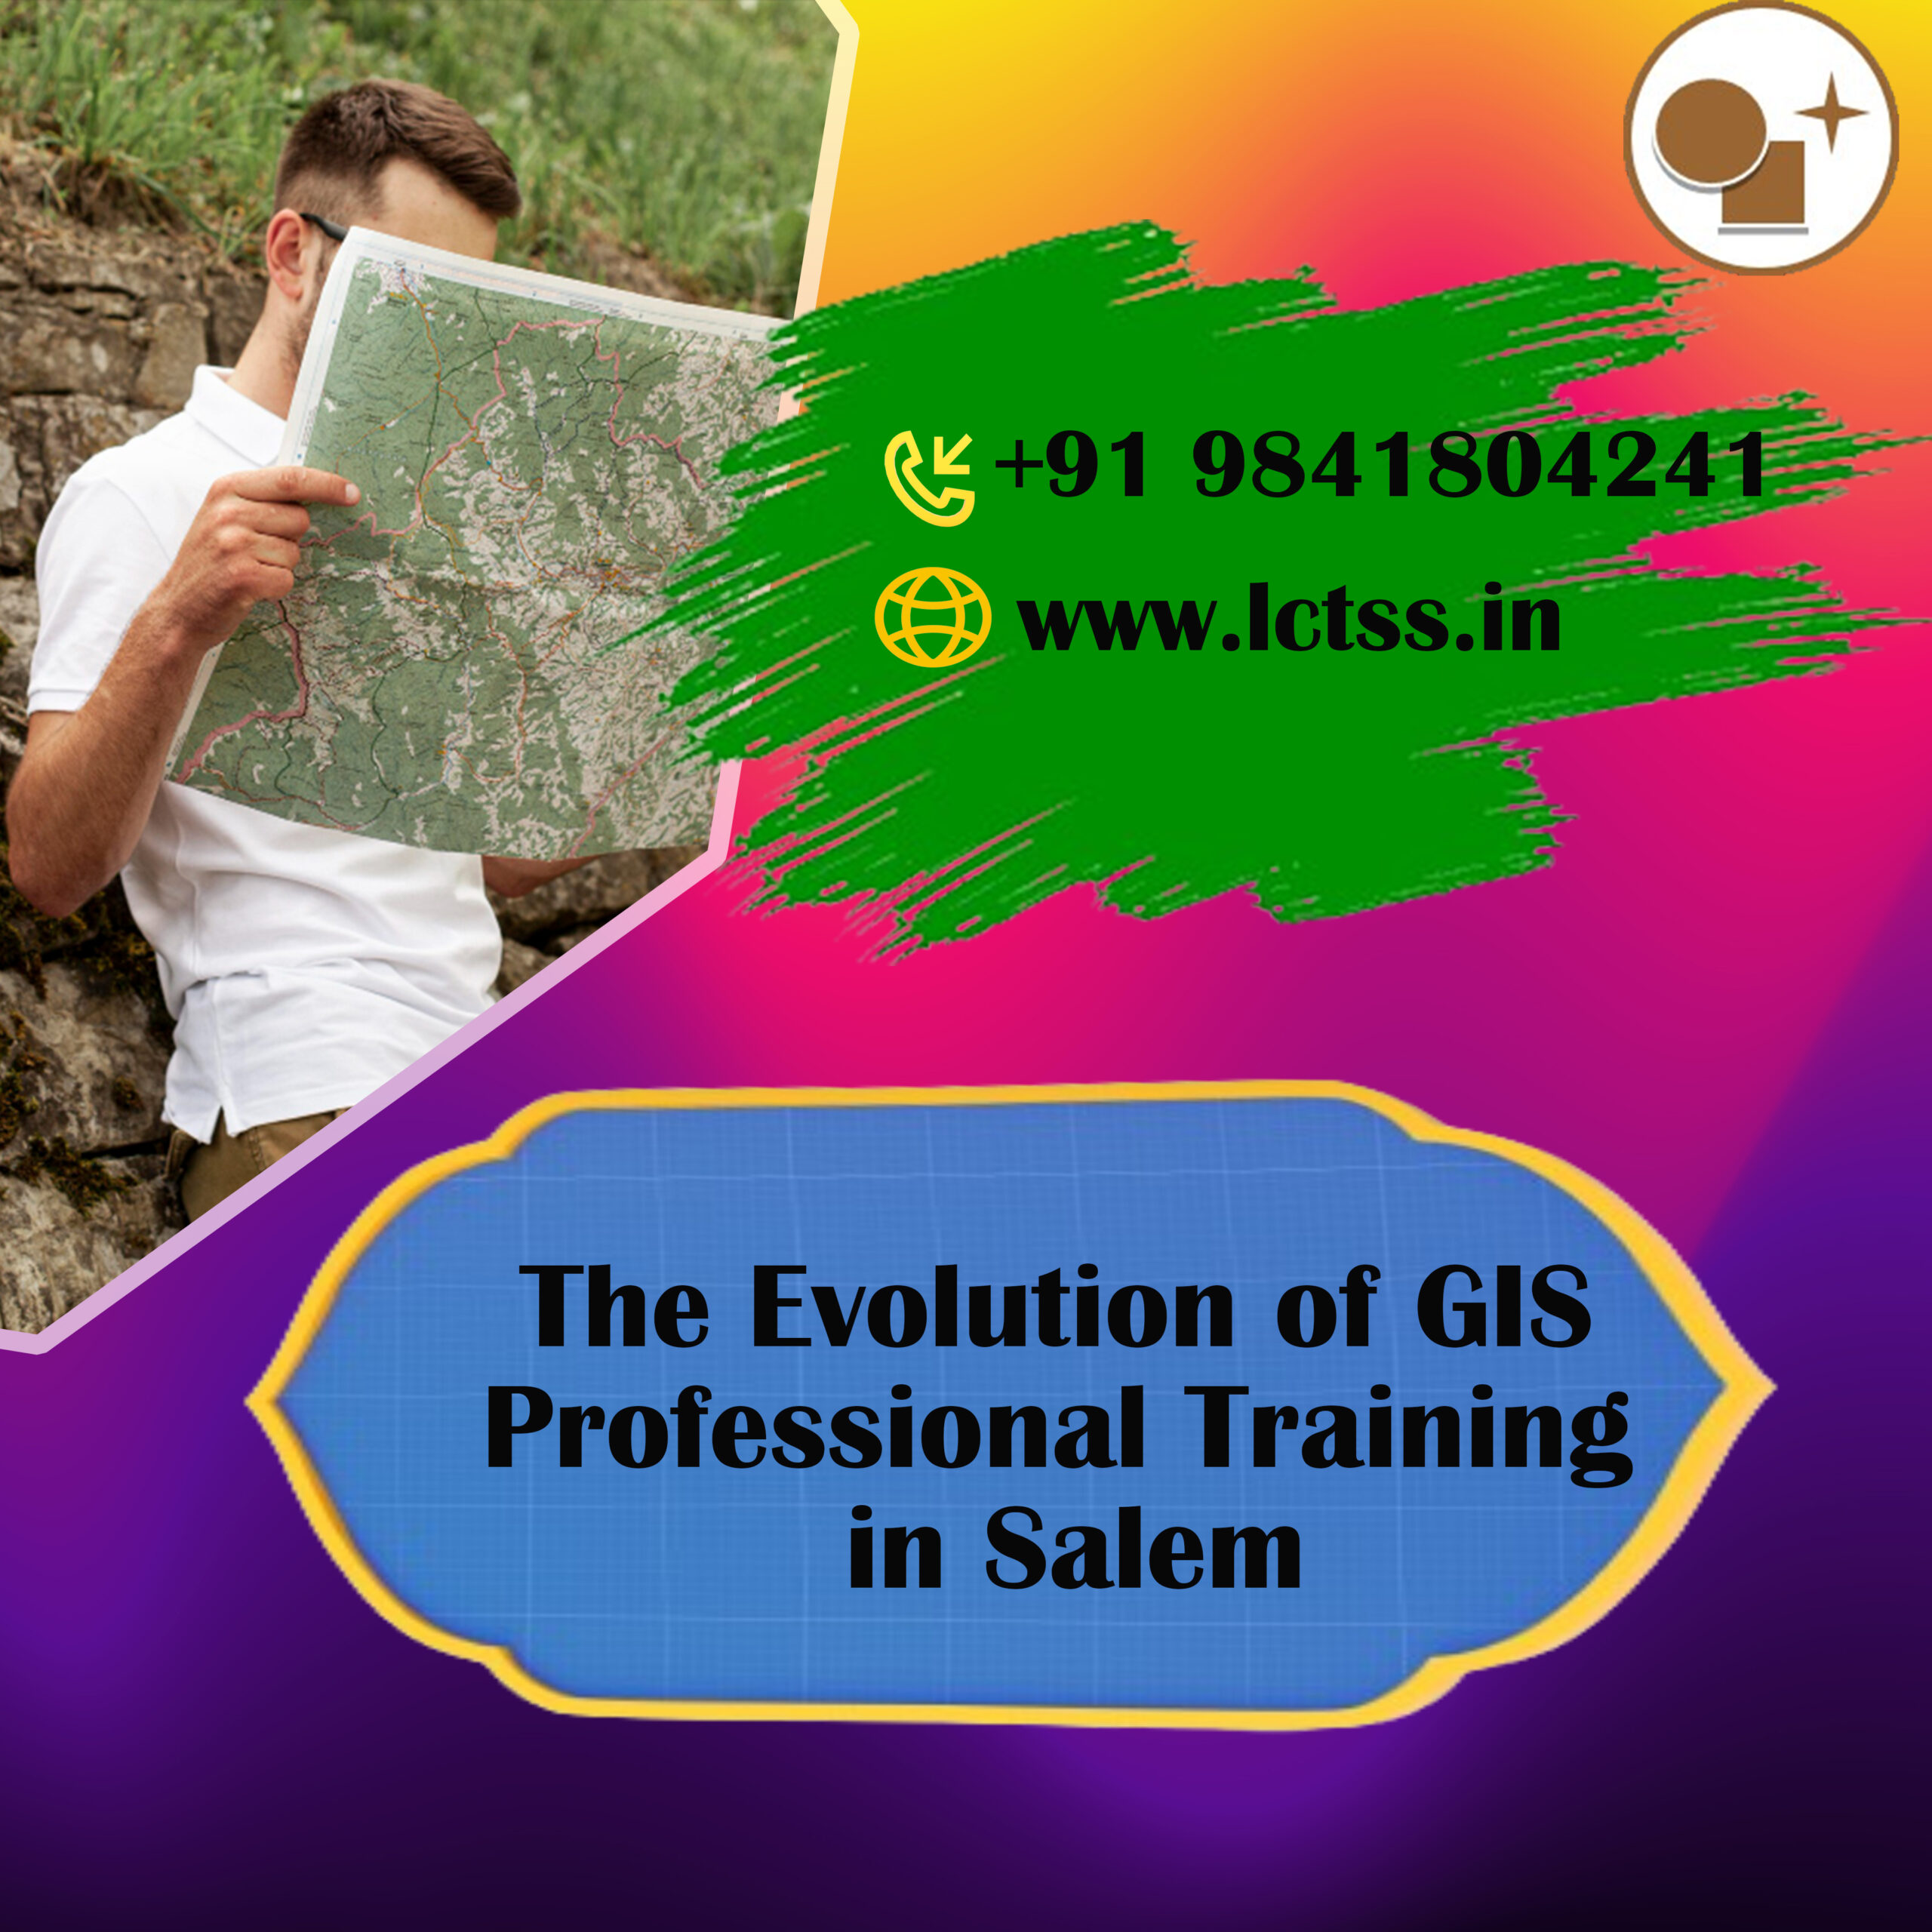 The Evolution of GIS Professional Training in Salem